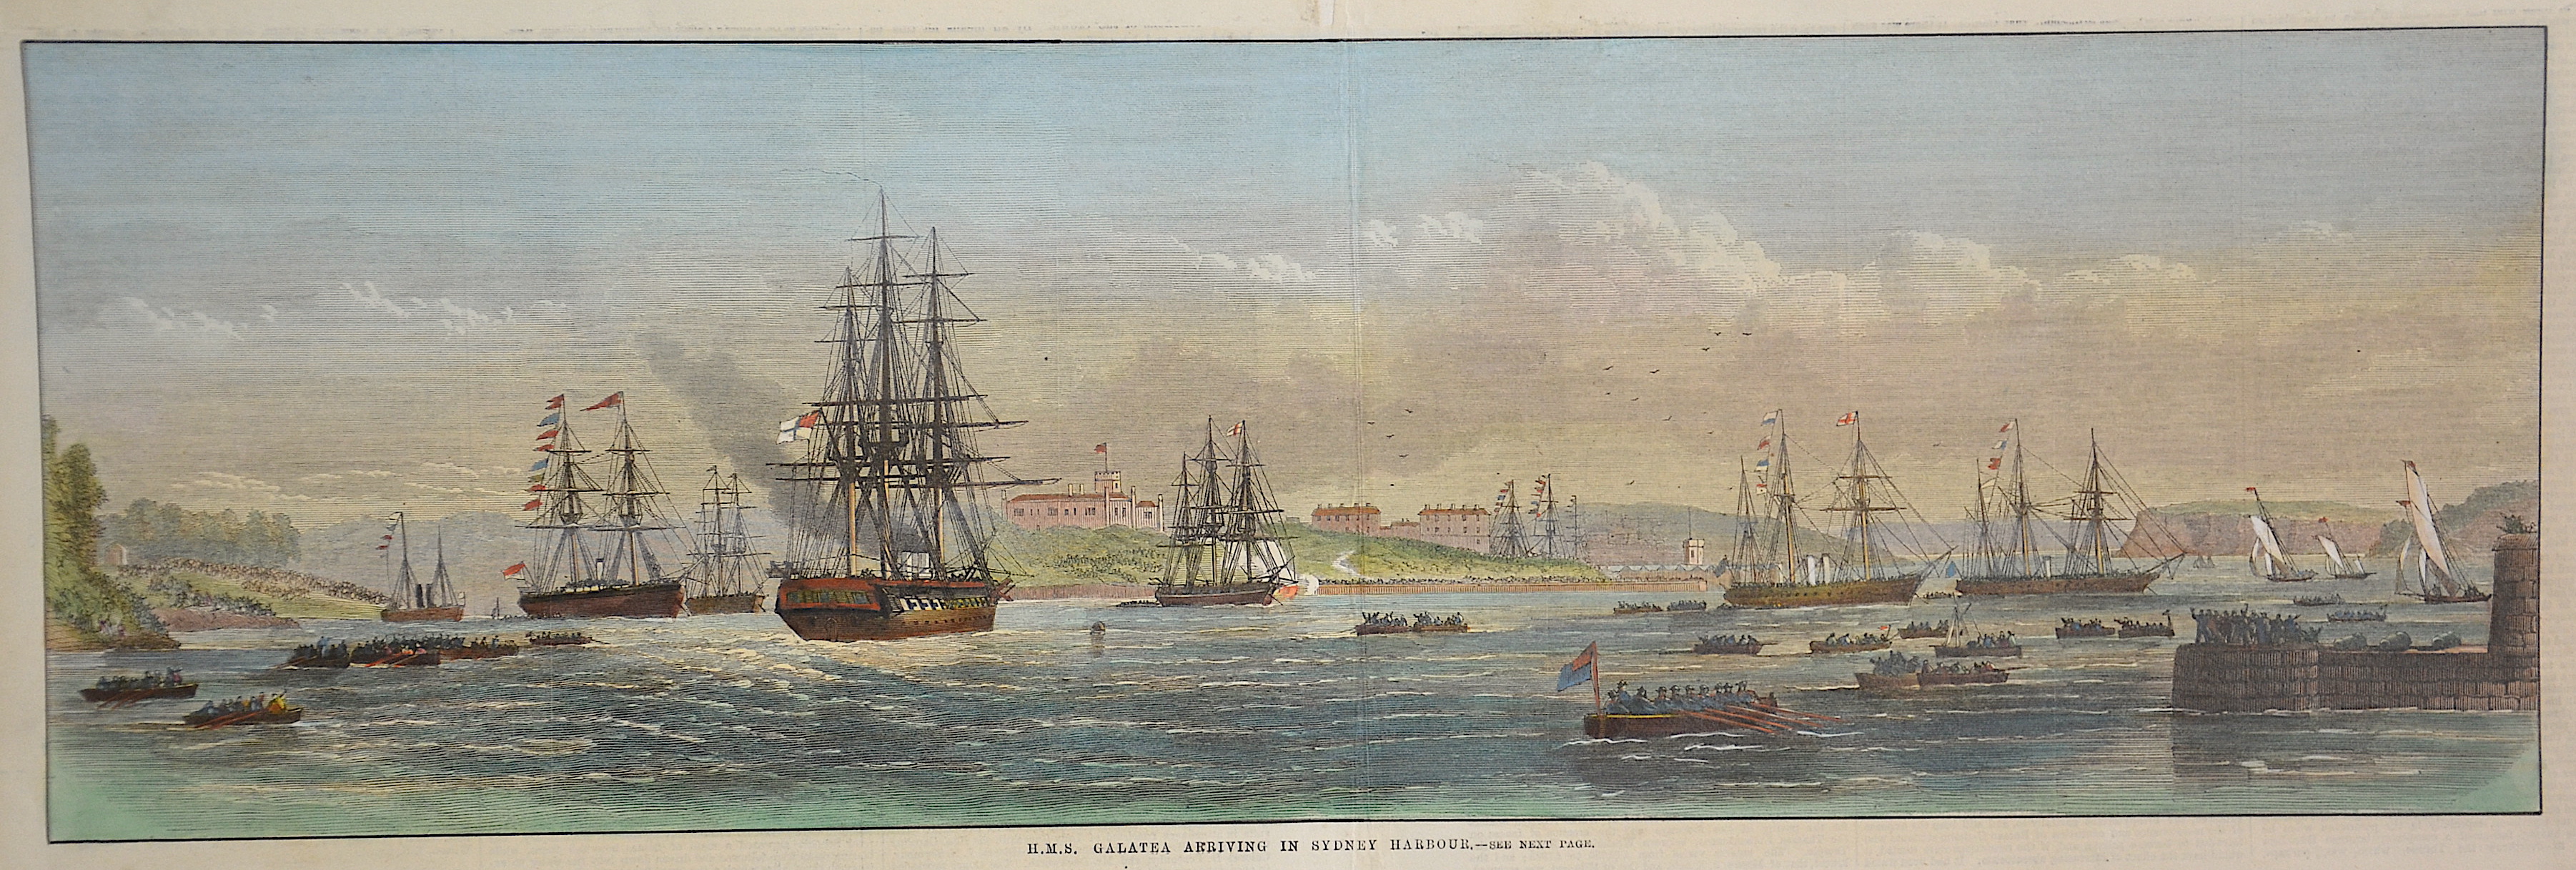 Anonymus  H.M.S. Galatea arriving in Sydney harbour